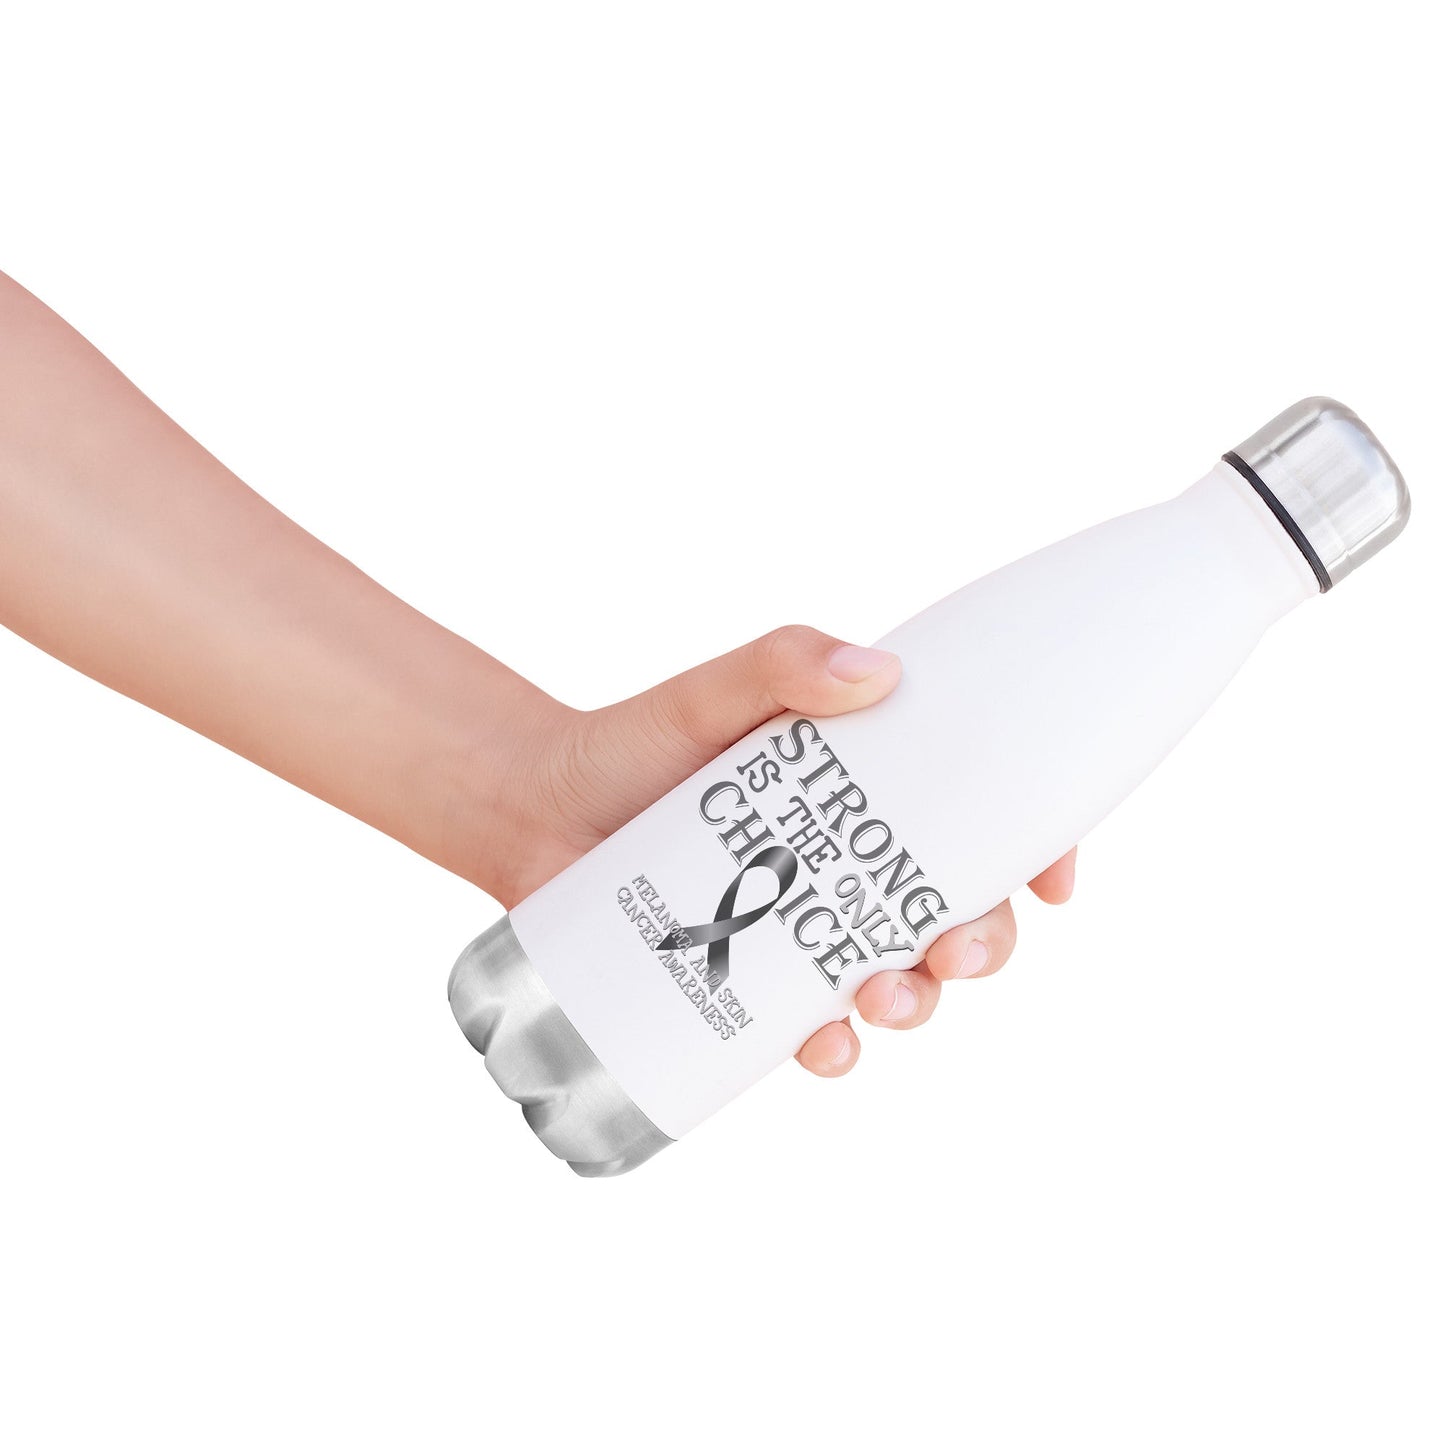 Strong is the Only Choice -Melanoma and Skin Cancer Awareness 20oz Insulated Water Bottle |x|